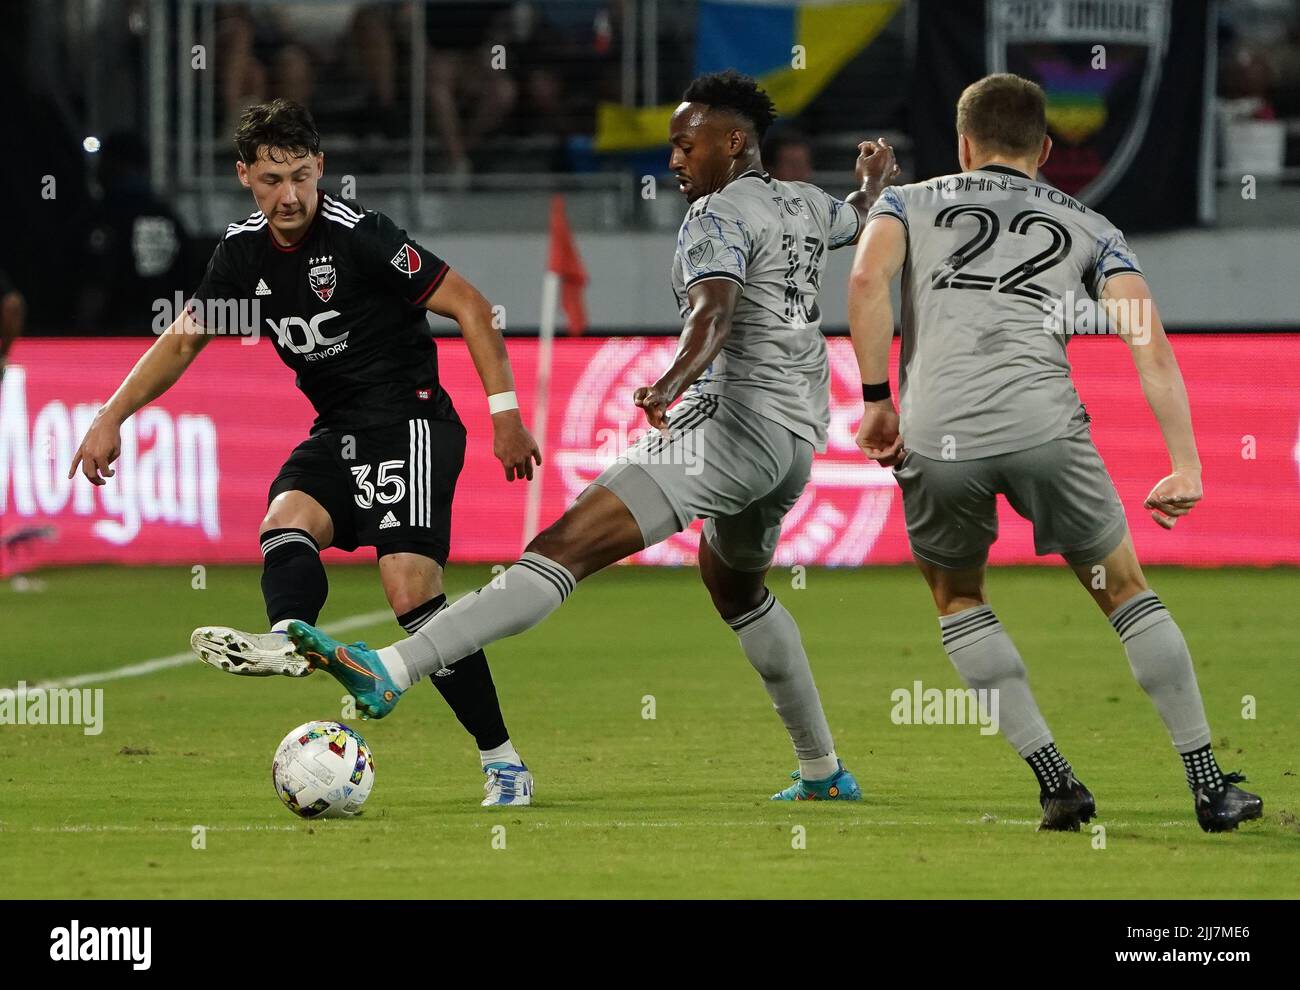 WASHINGTON, DC, USA - 23 JULY 2022: D.C. United midfielder Theodore Ku-DiPietro (35) sends a pass away from CF Montréal defender Keesean Ferdinand (33) during a MLS match between D.C United and C.F. Montreal, on July 23, 2022, at Audi Field, in Washington, DC. (Photo by Tony Quinn-Alamy Live News) Stock Photo